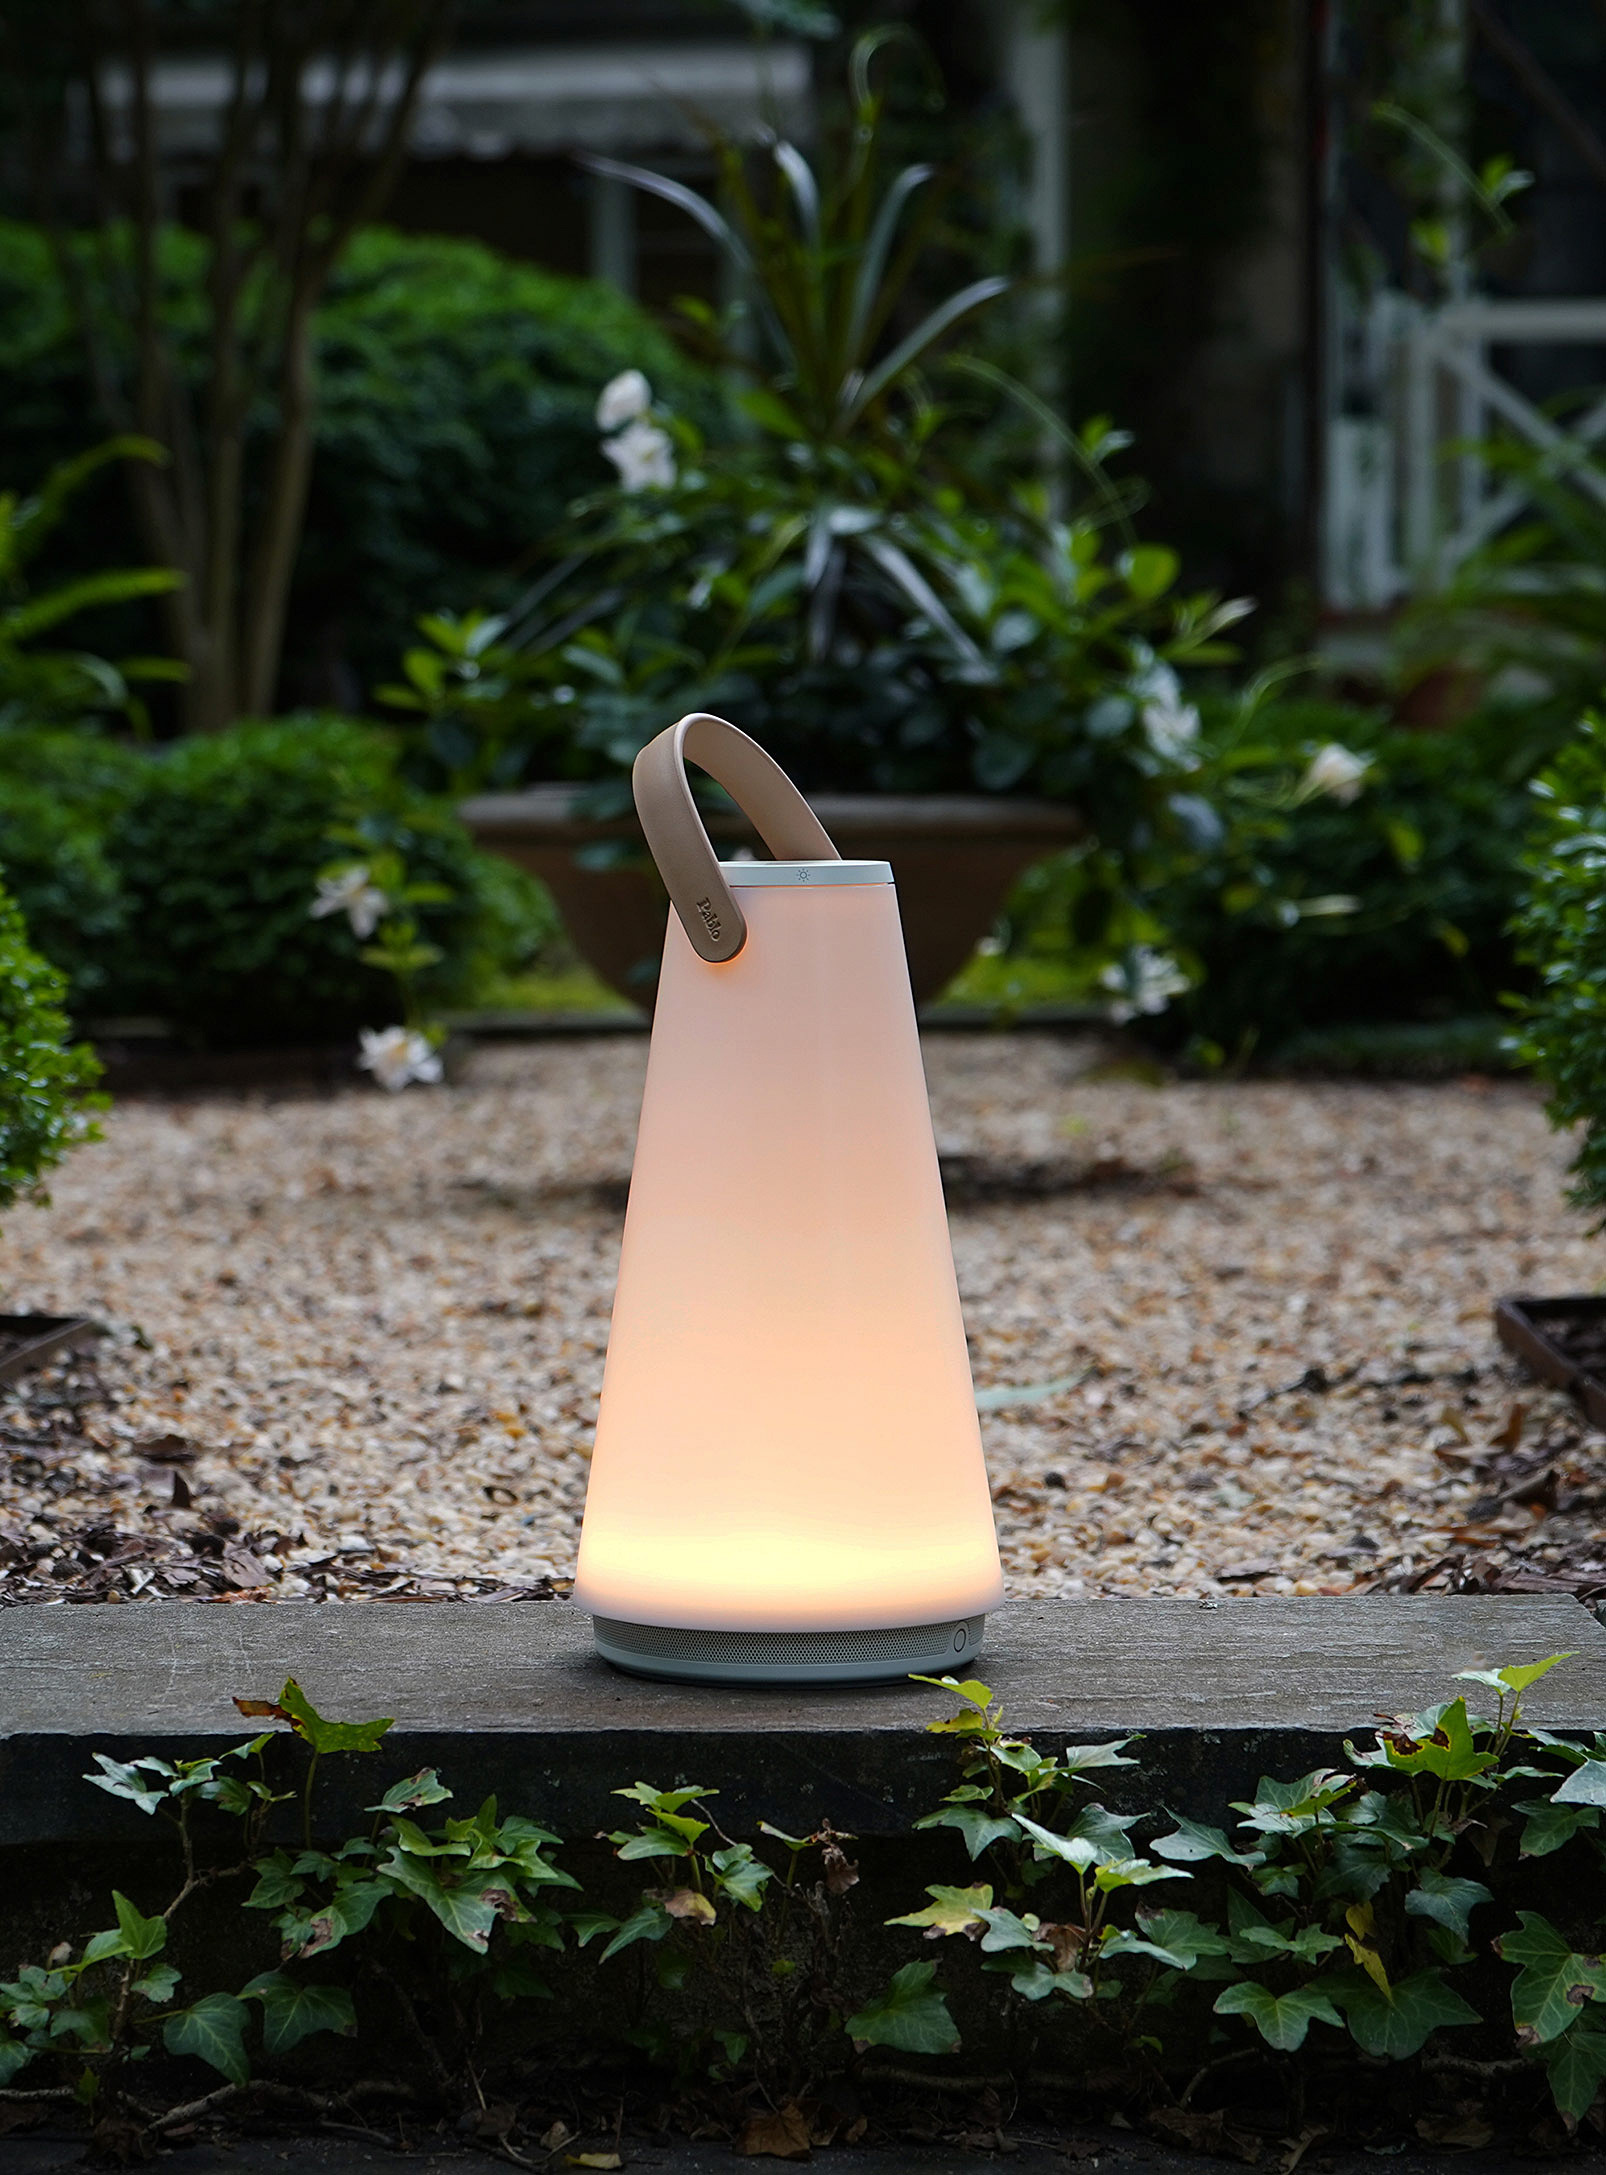 Pablo Designs Uma Portable Lamp With Built-in Speaker In Assorted